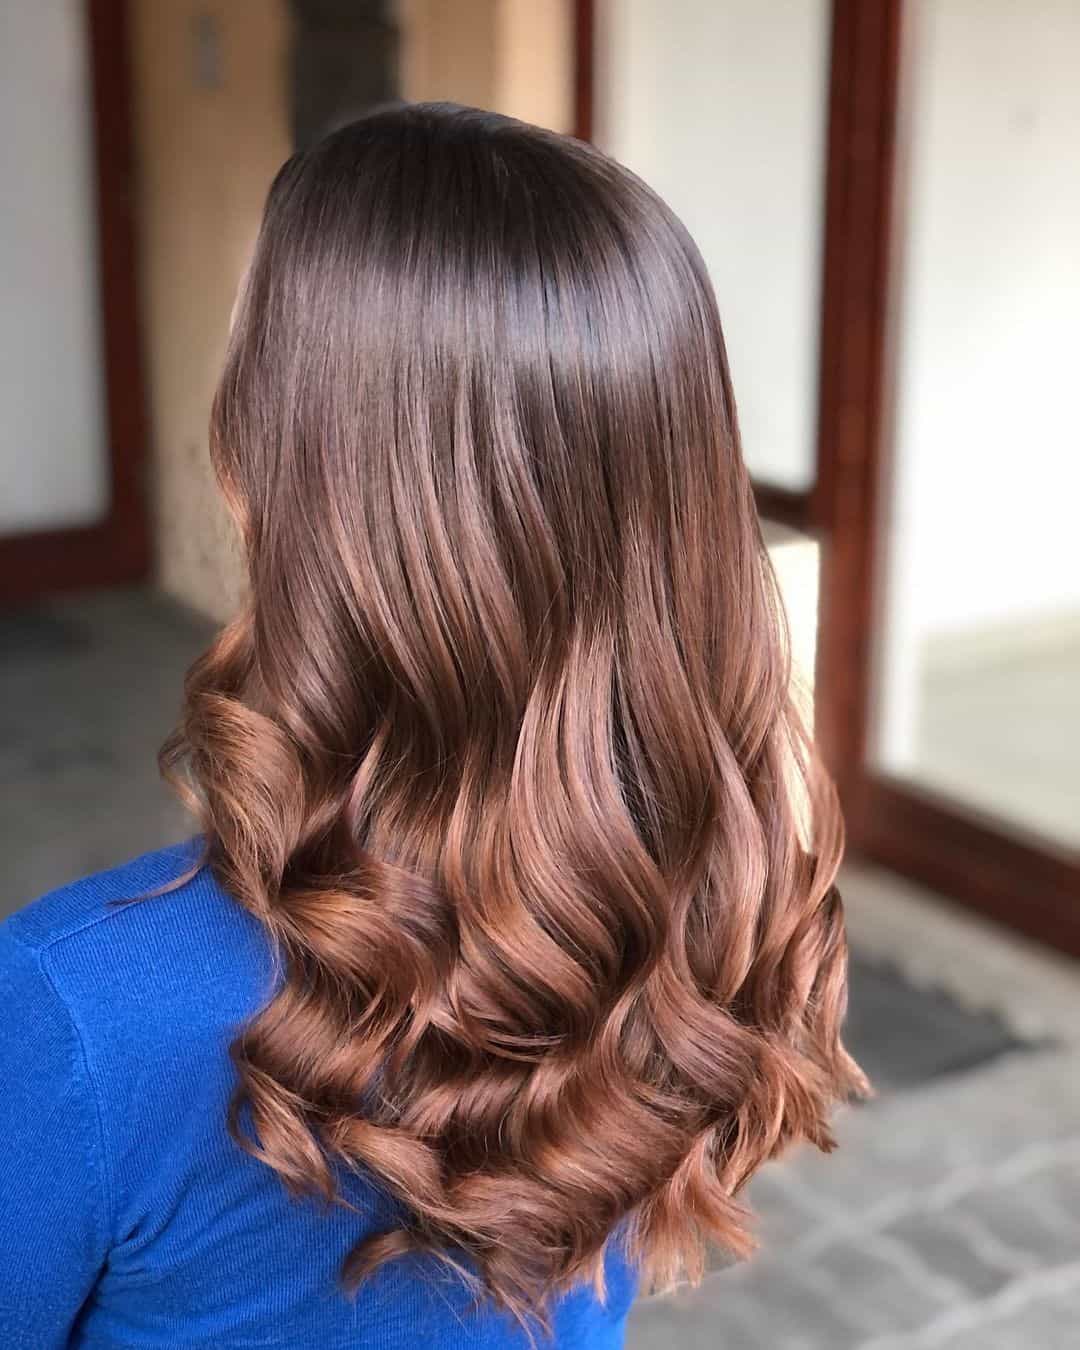 15 Fabulous Brown Ombre Hair  LoveHairStylescom